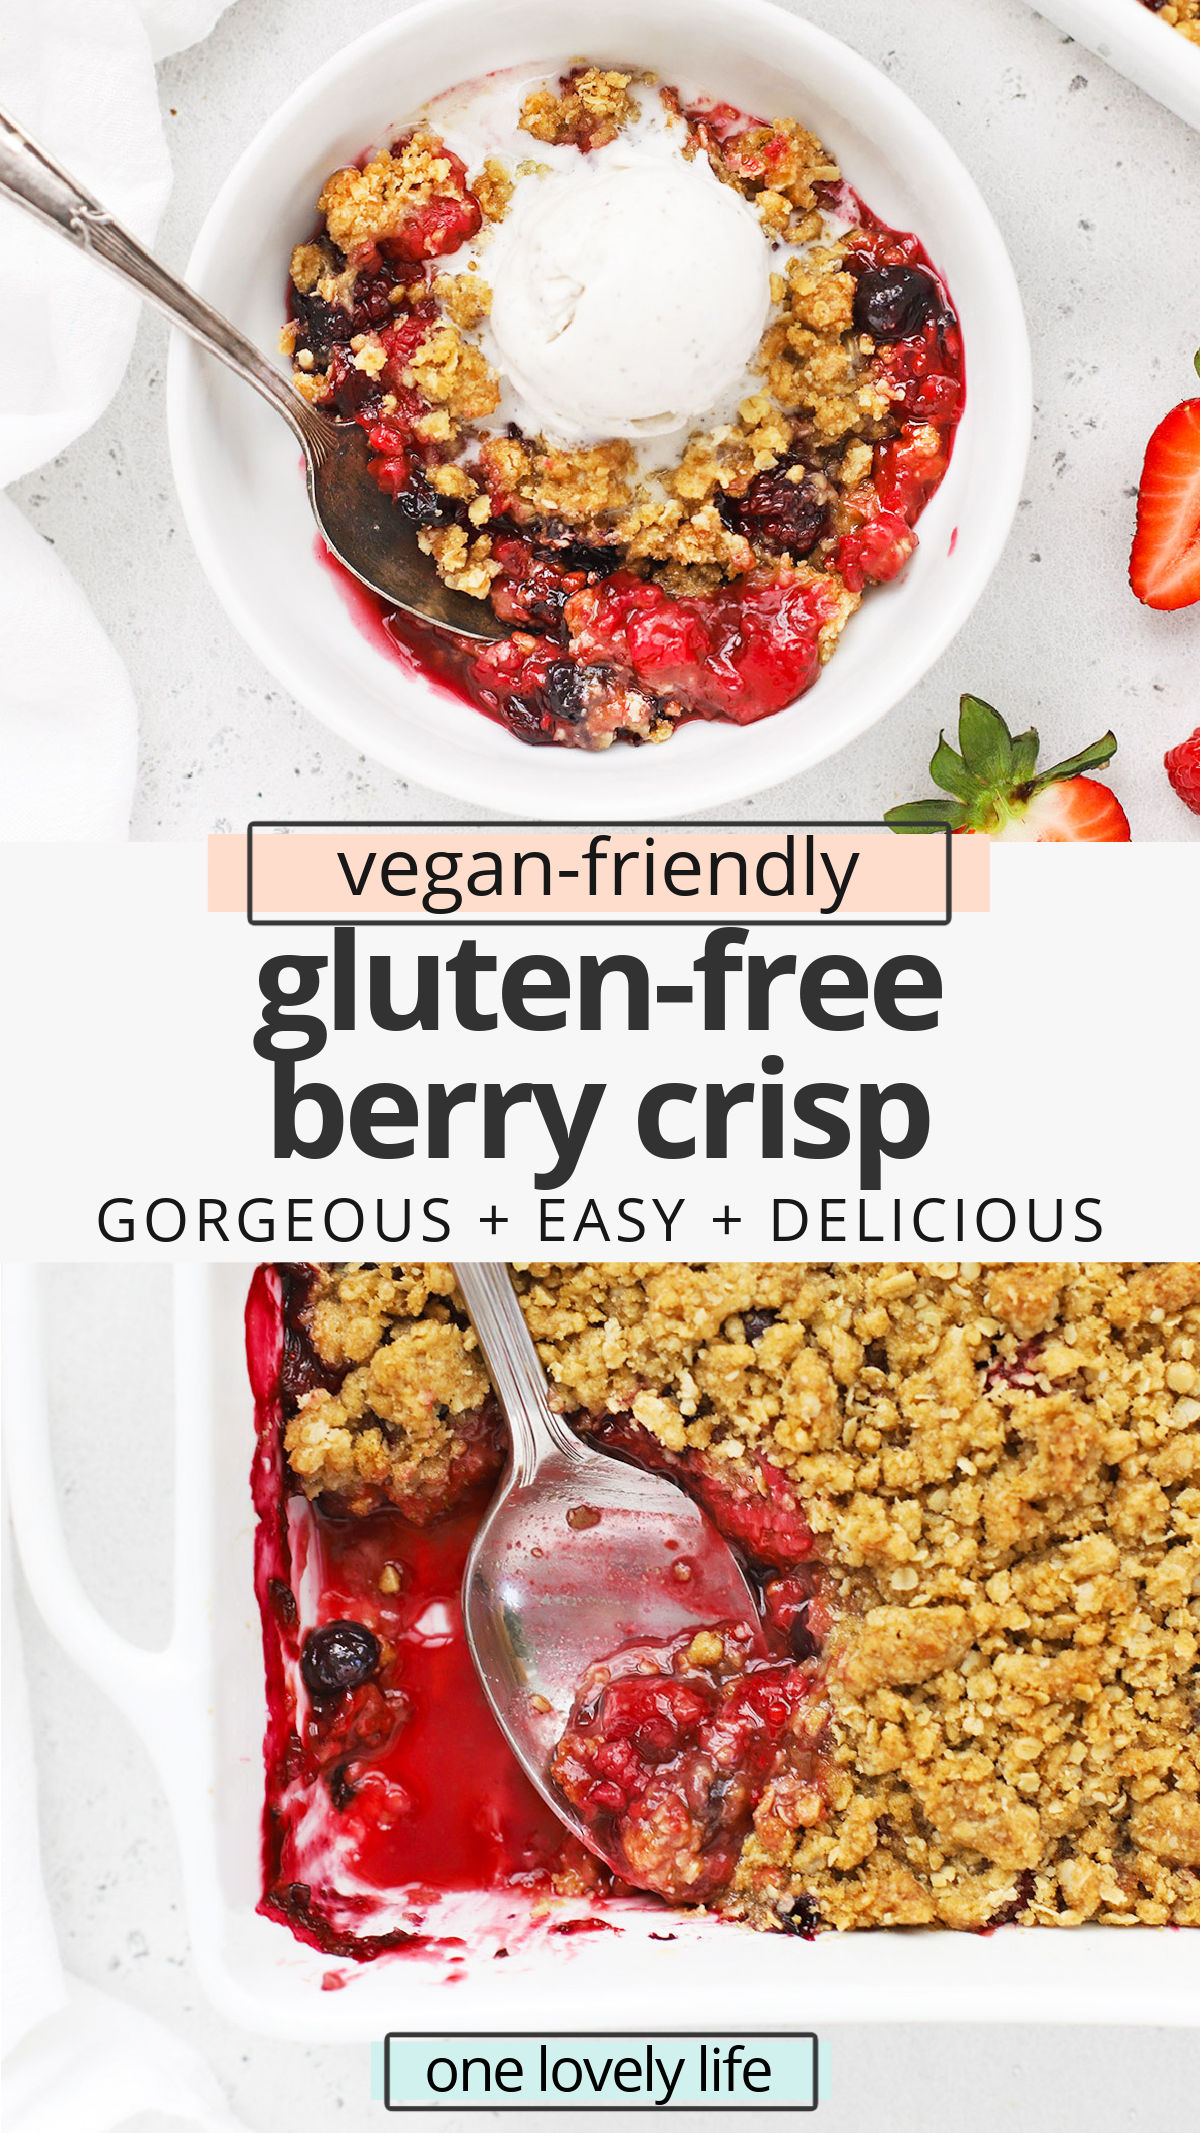 Gluten-Free Berry Crisp - Colorful berries topped with a buttery crumble topping. You'll love this mixed berry crisp with a scoop of ice cream on top! (Gluten-Free, Vegan-Friendly) // triple berry crisp // mixed berry crisp recipe // vegan berry crisp // summer dessert // spring dessert // 4th of July dessert #glutenfree #berrycrisp #dessert